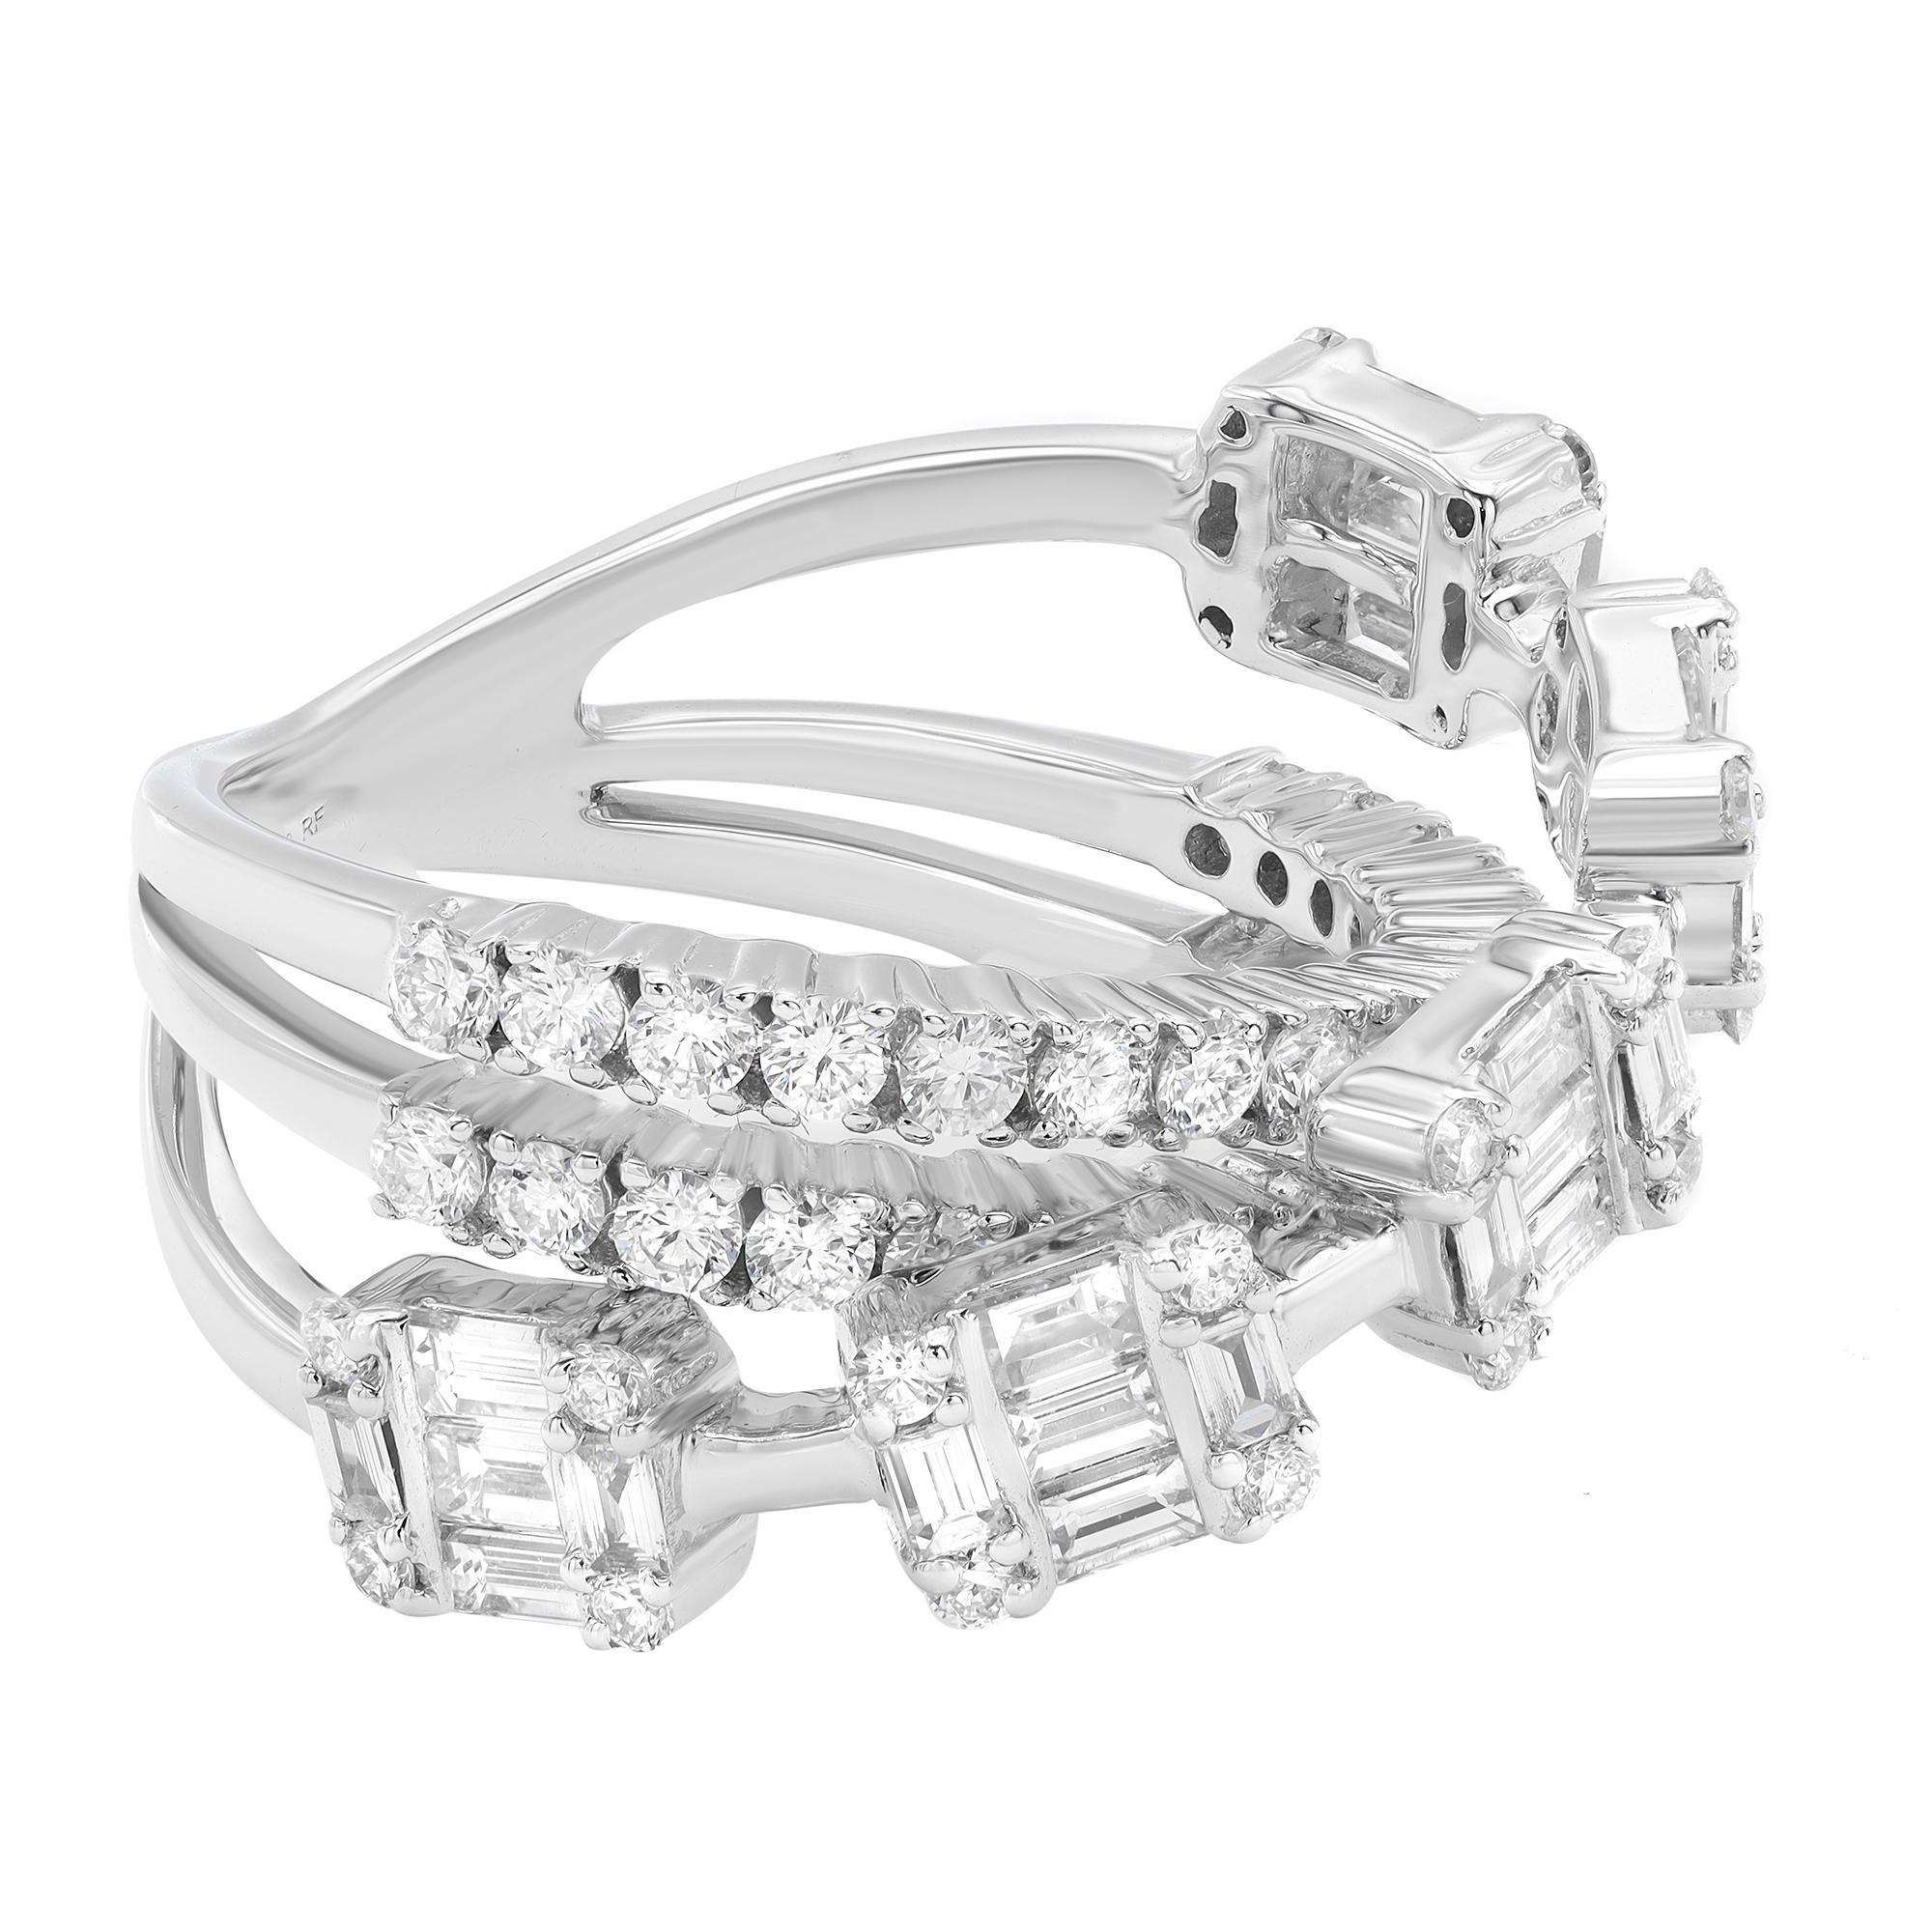 This beautiful ring features two bands of prong set round cut diamonds intersecting with a channel set baguette and round cut diamond band in a crossover design. Crafted in 18k white gold, this ring exudes understated style and elegance. Set with